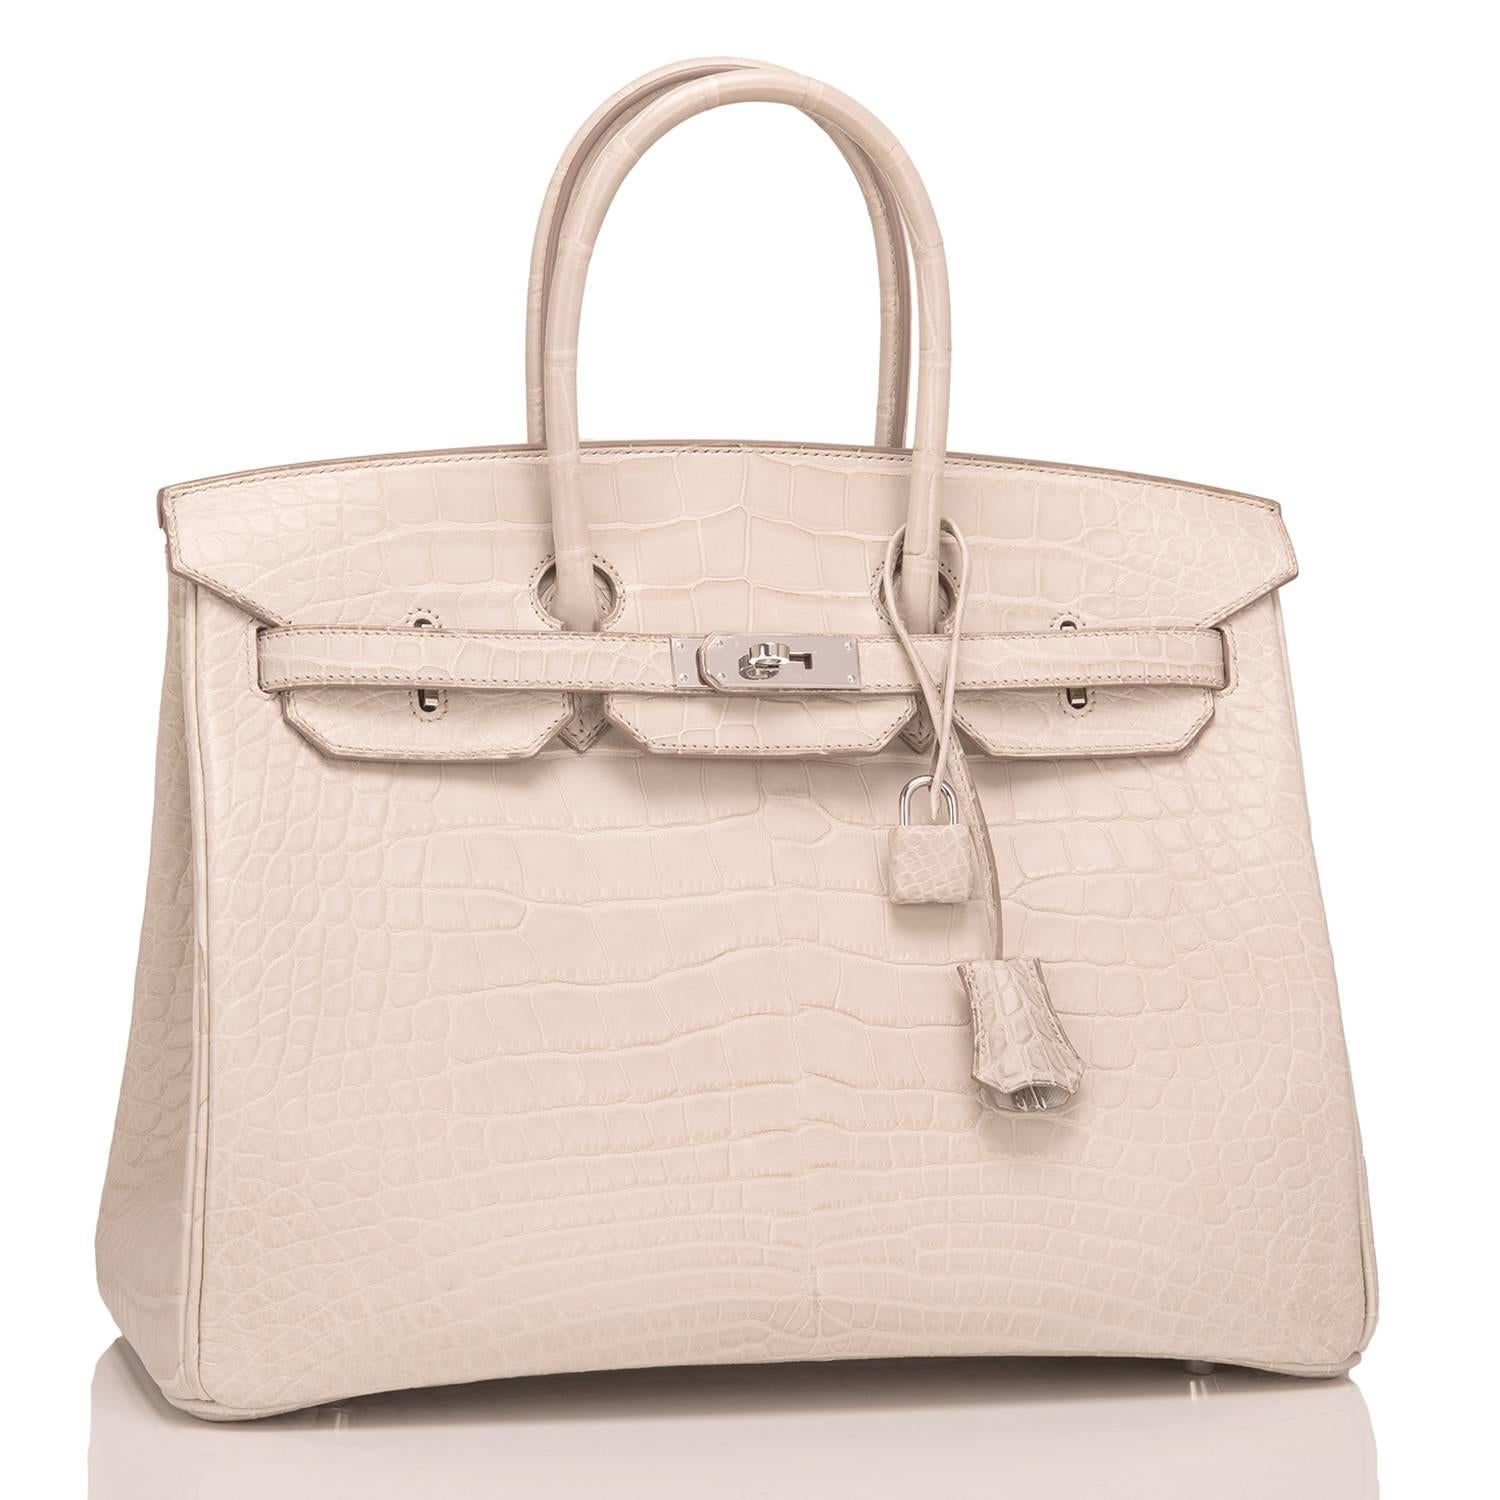 Hermes Beton Birkin 35cm of matte alligator leather with palladium hardware.

This Birkin has tonal stitching, a front toggle closure, a clochette with lock and two keys, and double rolled handles.

The interior is lined with Beton chevre and has